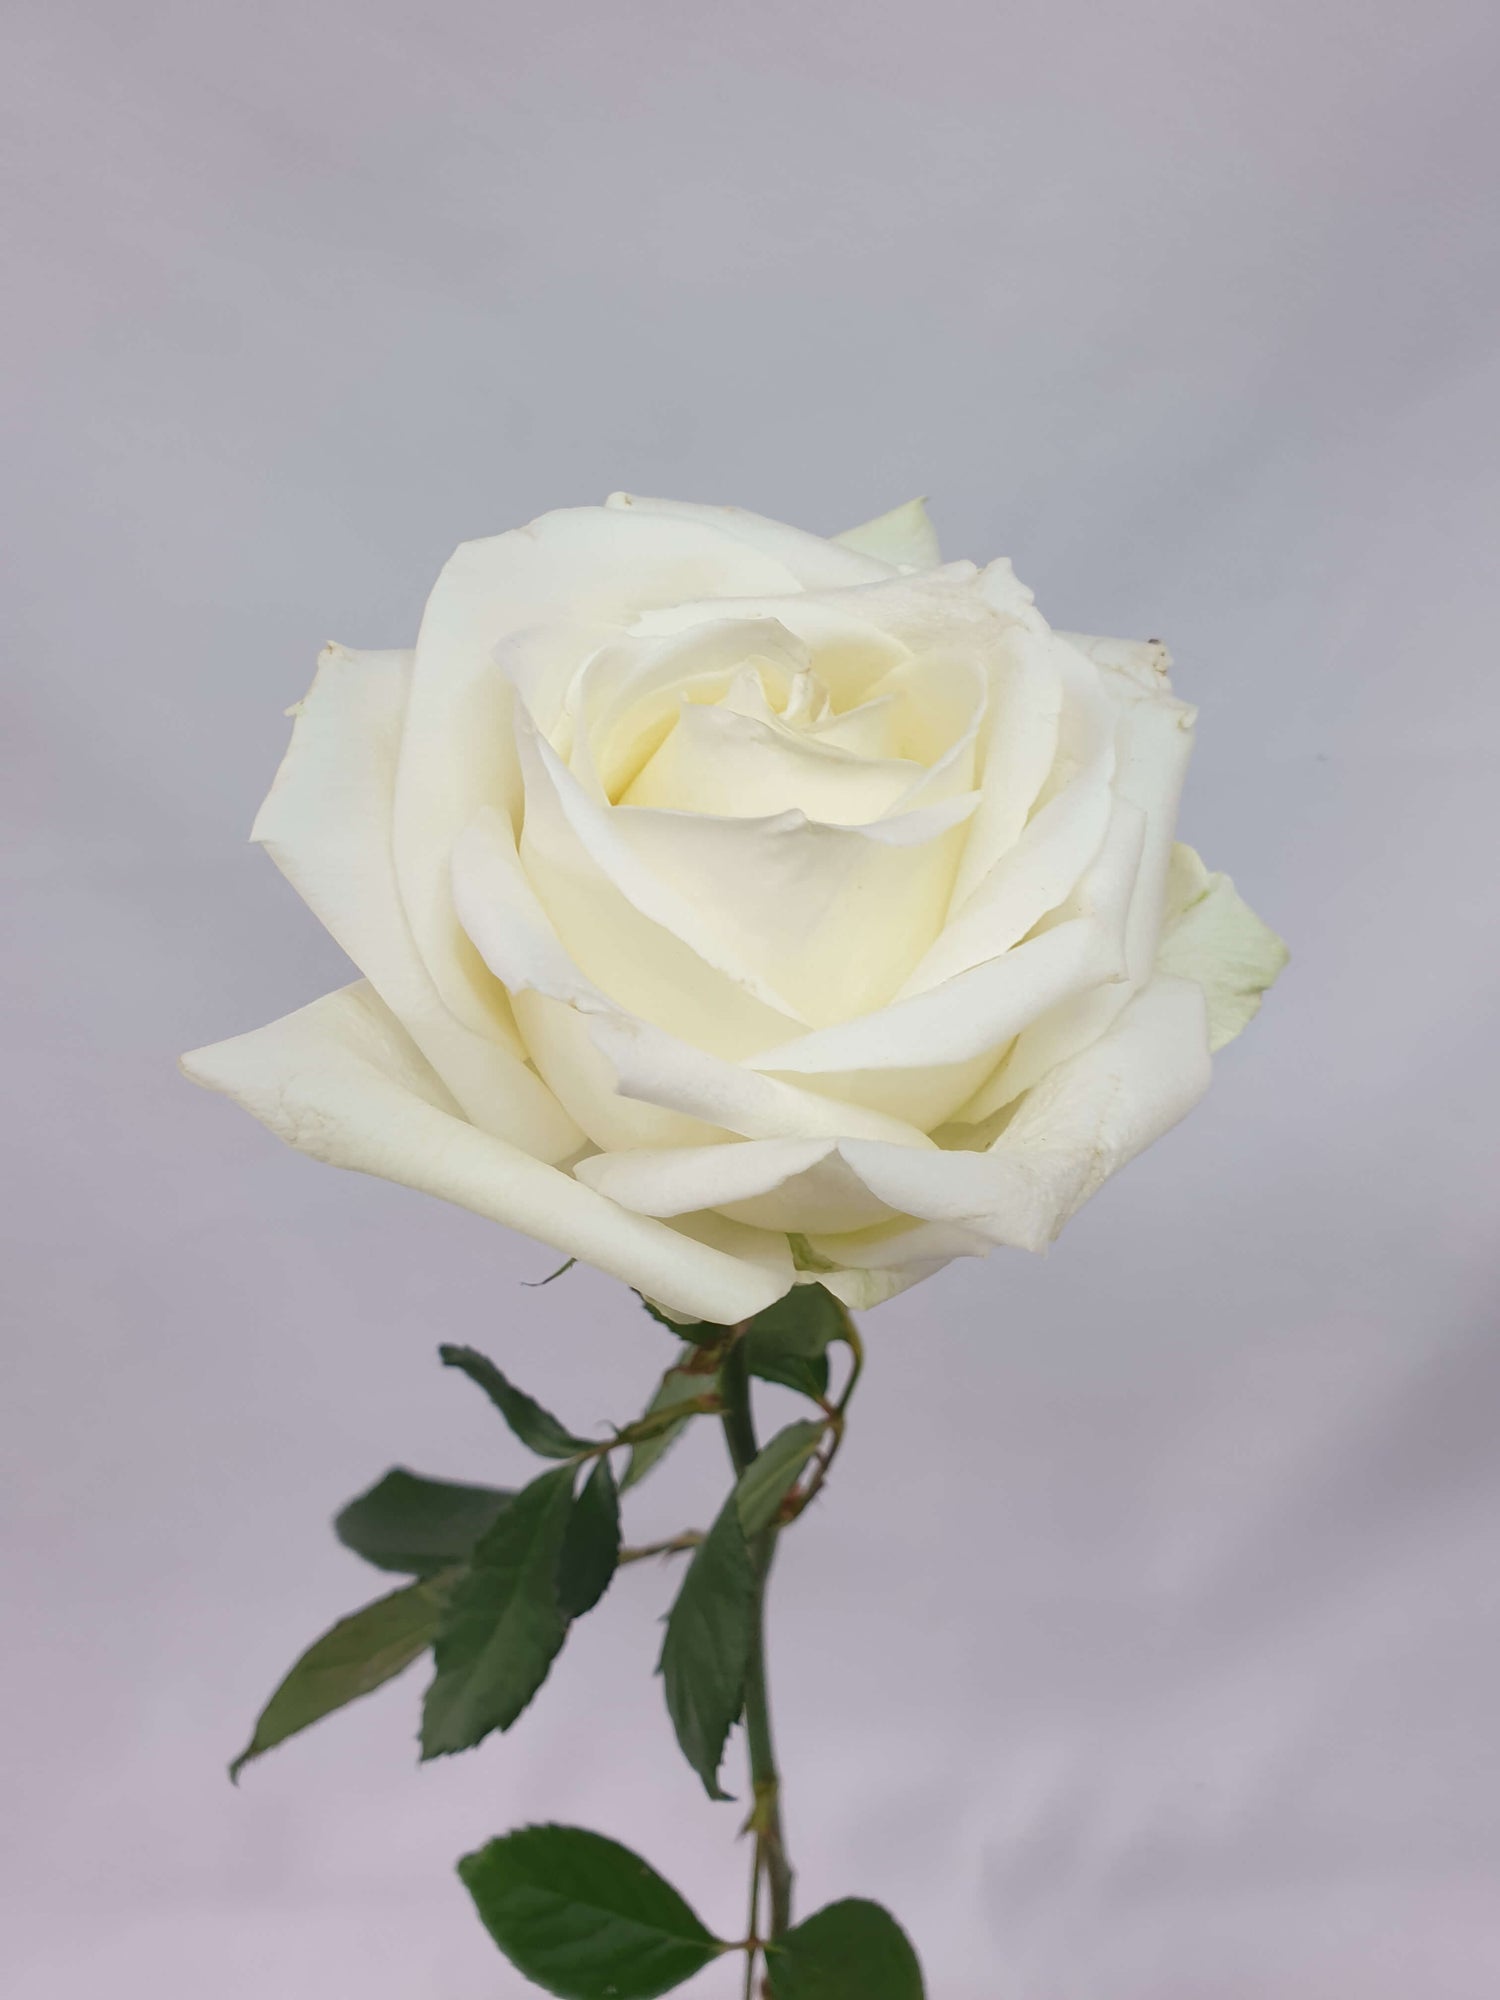 A white rose signifies sympathy.